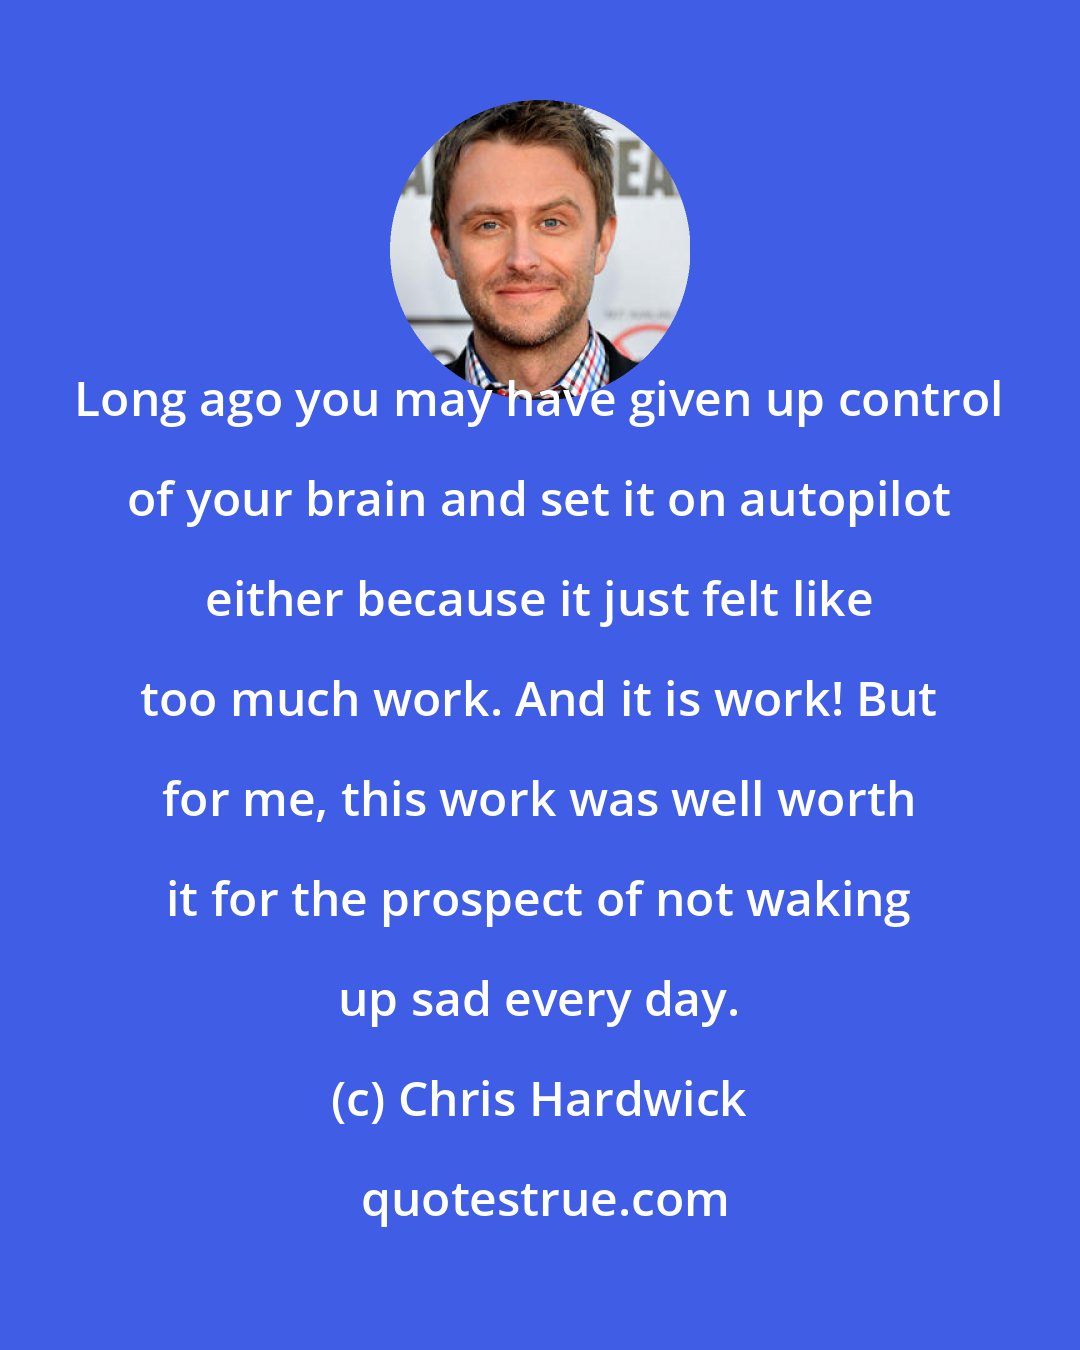 Chris Hardwick: Long ago you may have given up control of your brain and set it on autopilot either because it just felt like too much work. And it is work! But for me, this work was well worth it for the prospect of not waking up sad every day.